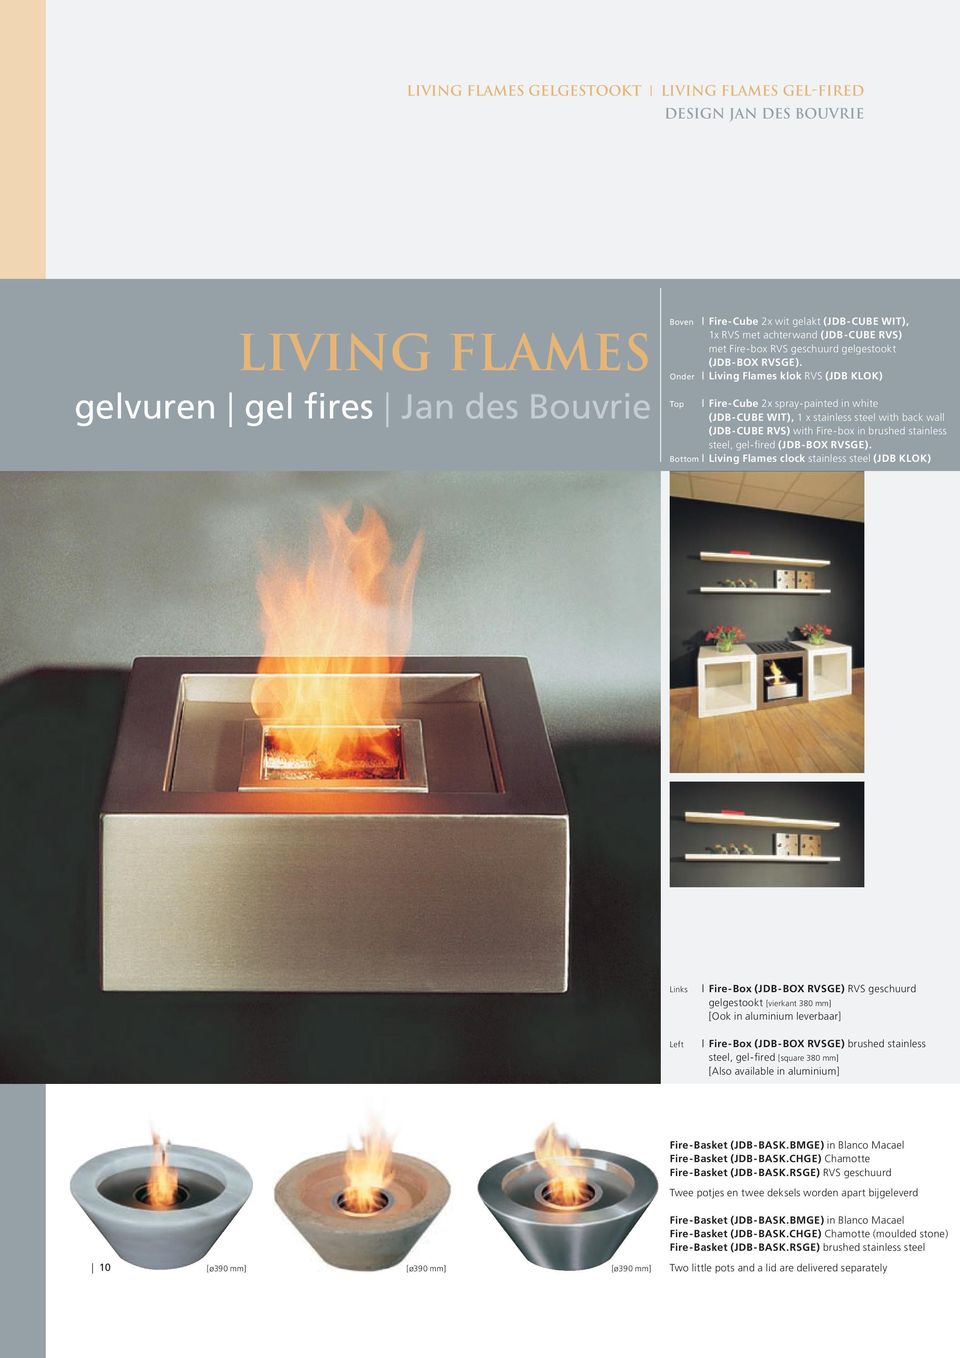 Onder Living Flames klok RVS (JDB KLOK) Top Fire-Cube 2x spray-painted in white (JDB-CUBE WIT), 1 x stainless steel with back wall (JDB-CUBE RVS) with Fire-box in brushed stainless steel, gel-fired